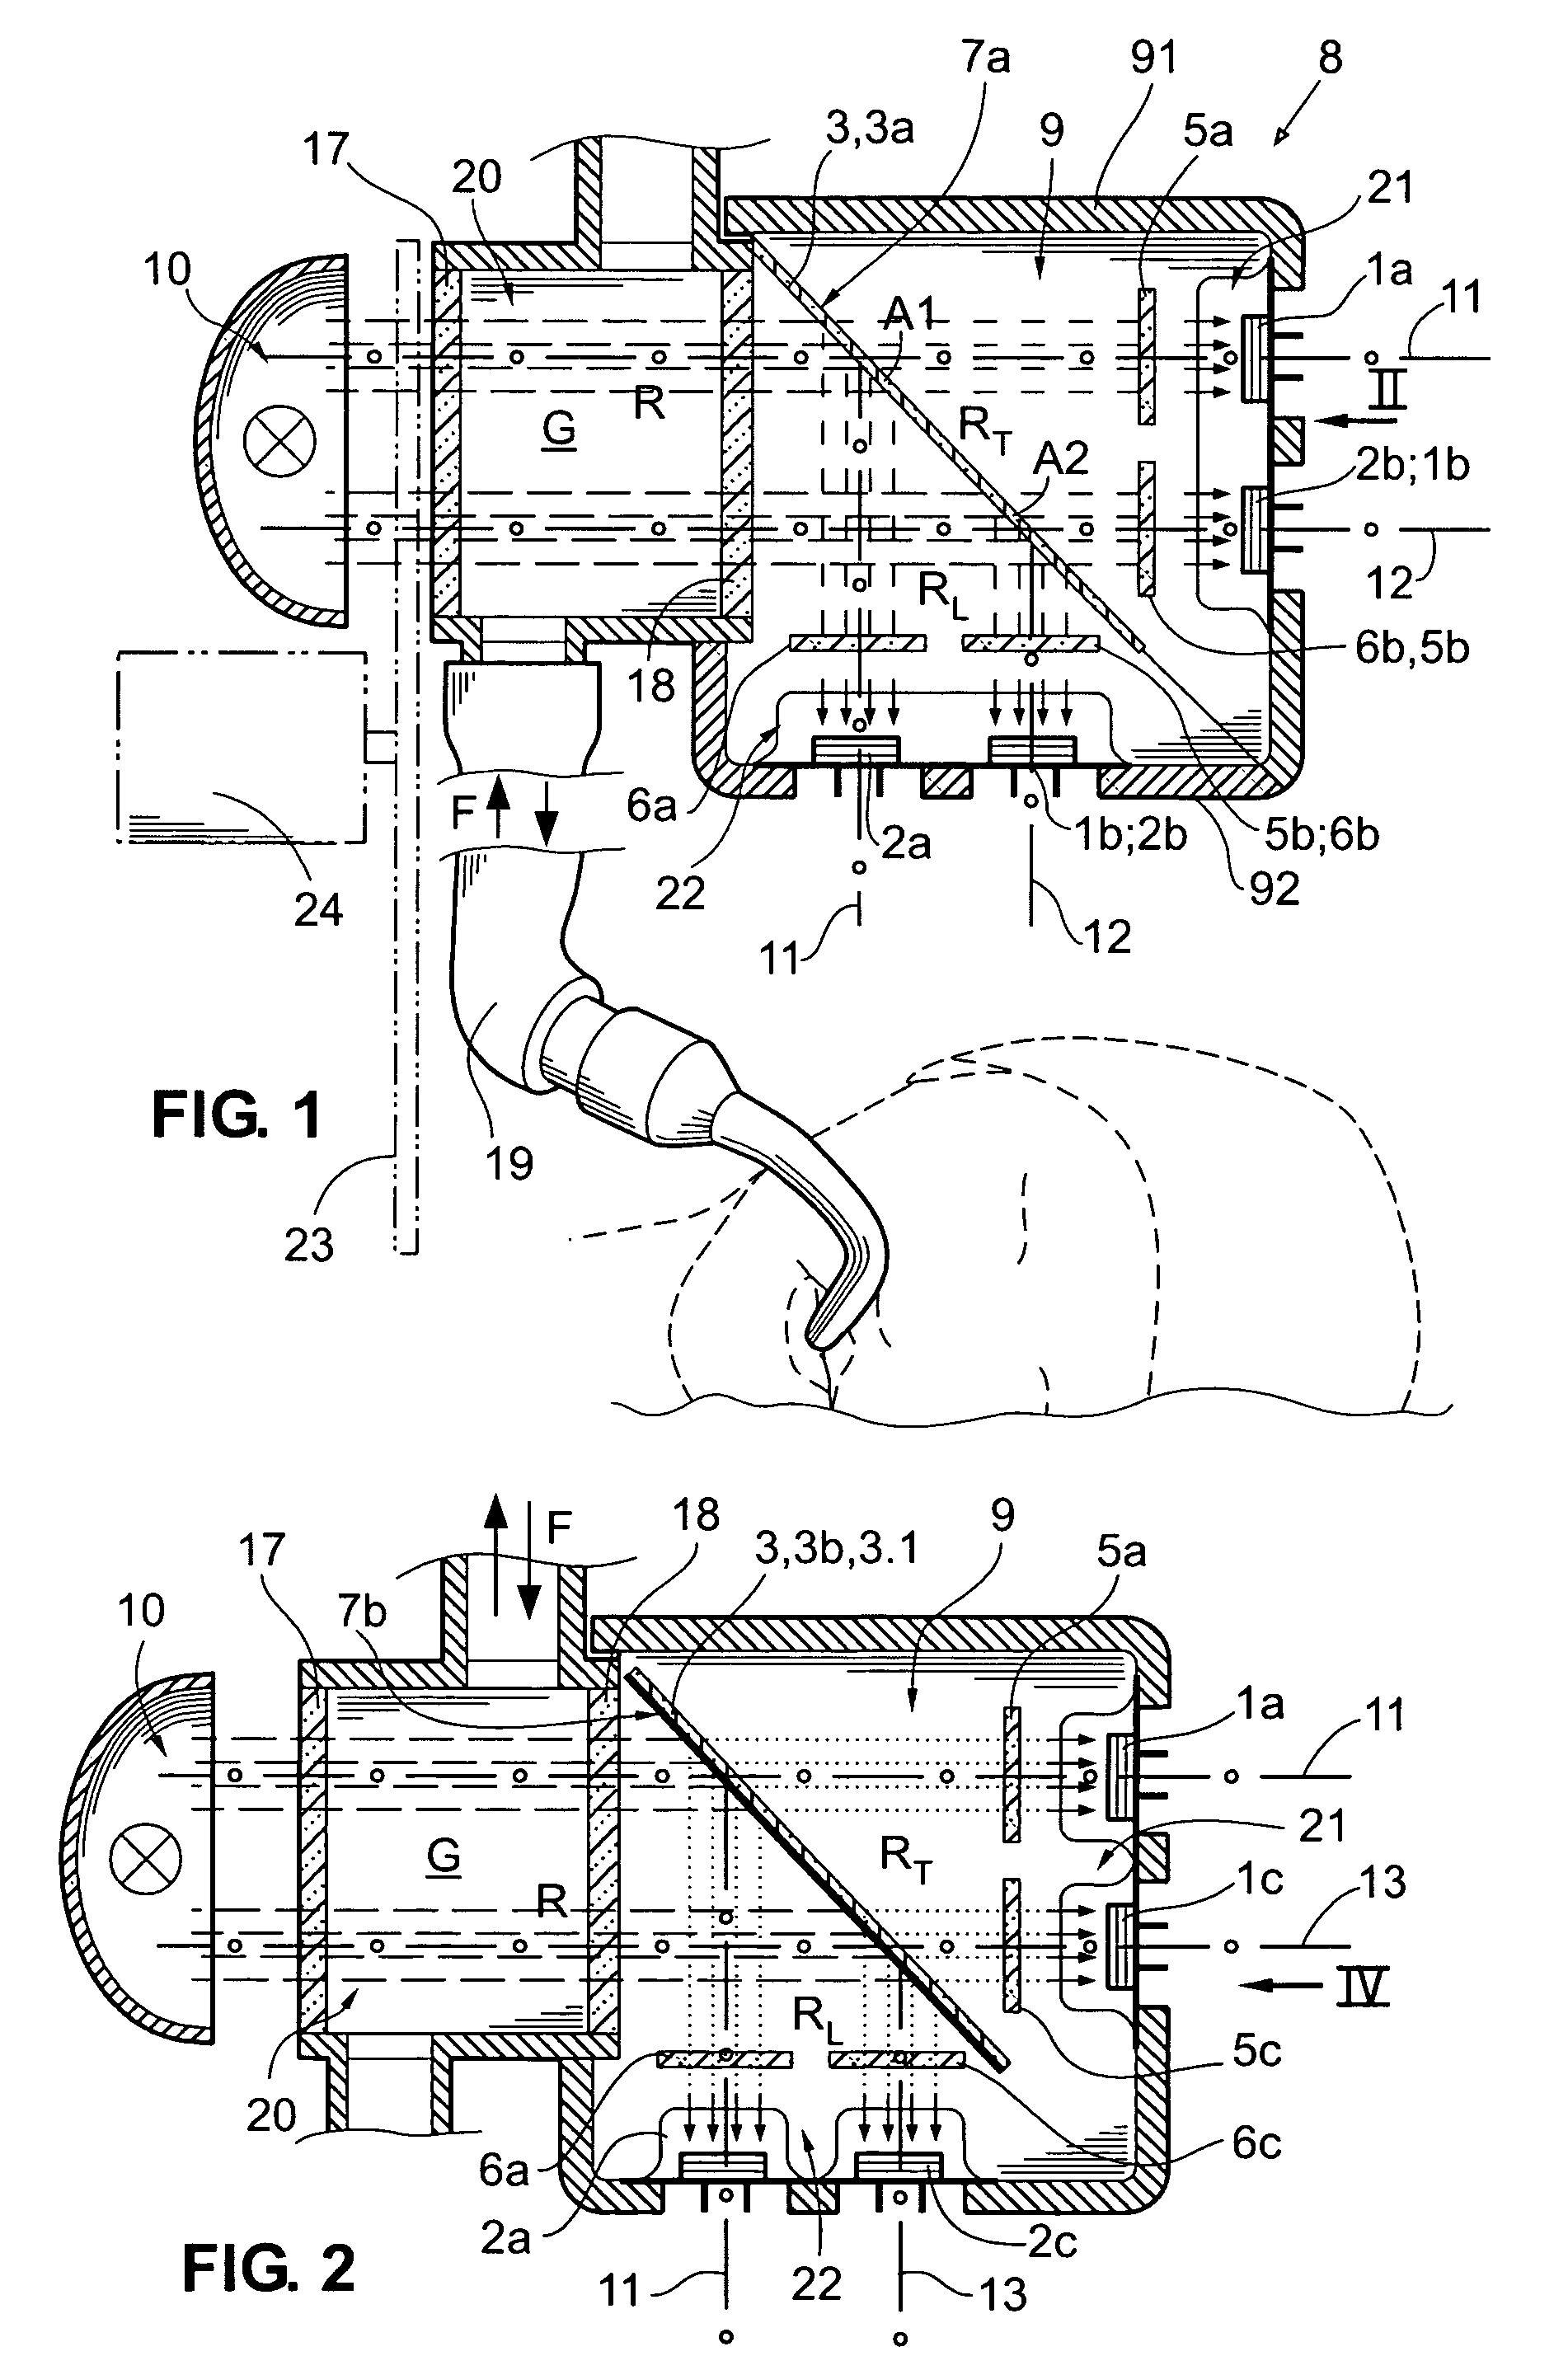 Detection assembly and measuring arrangement for multigas analyzers